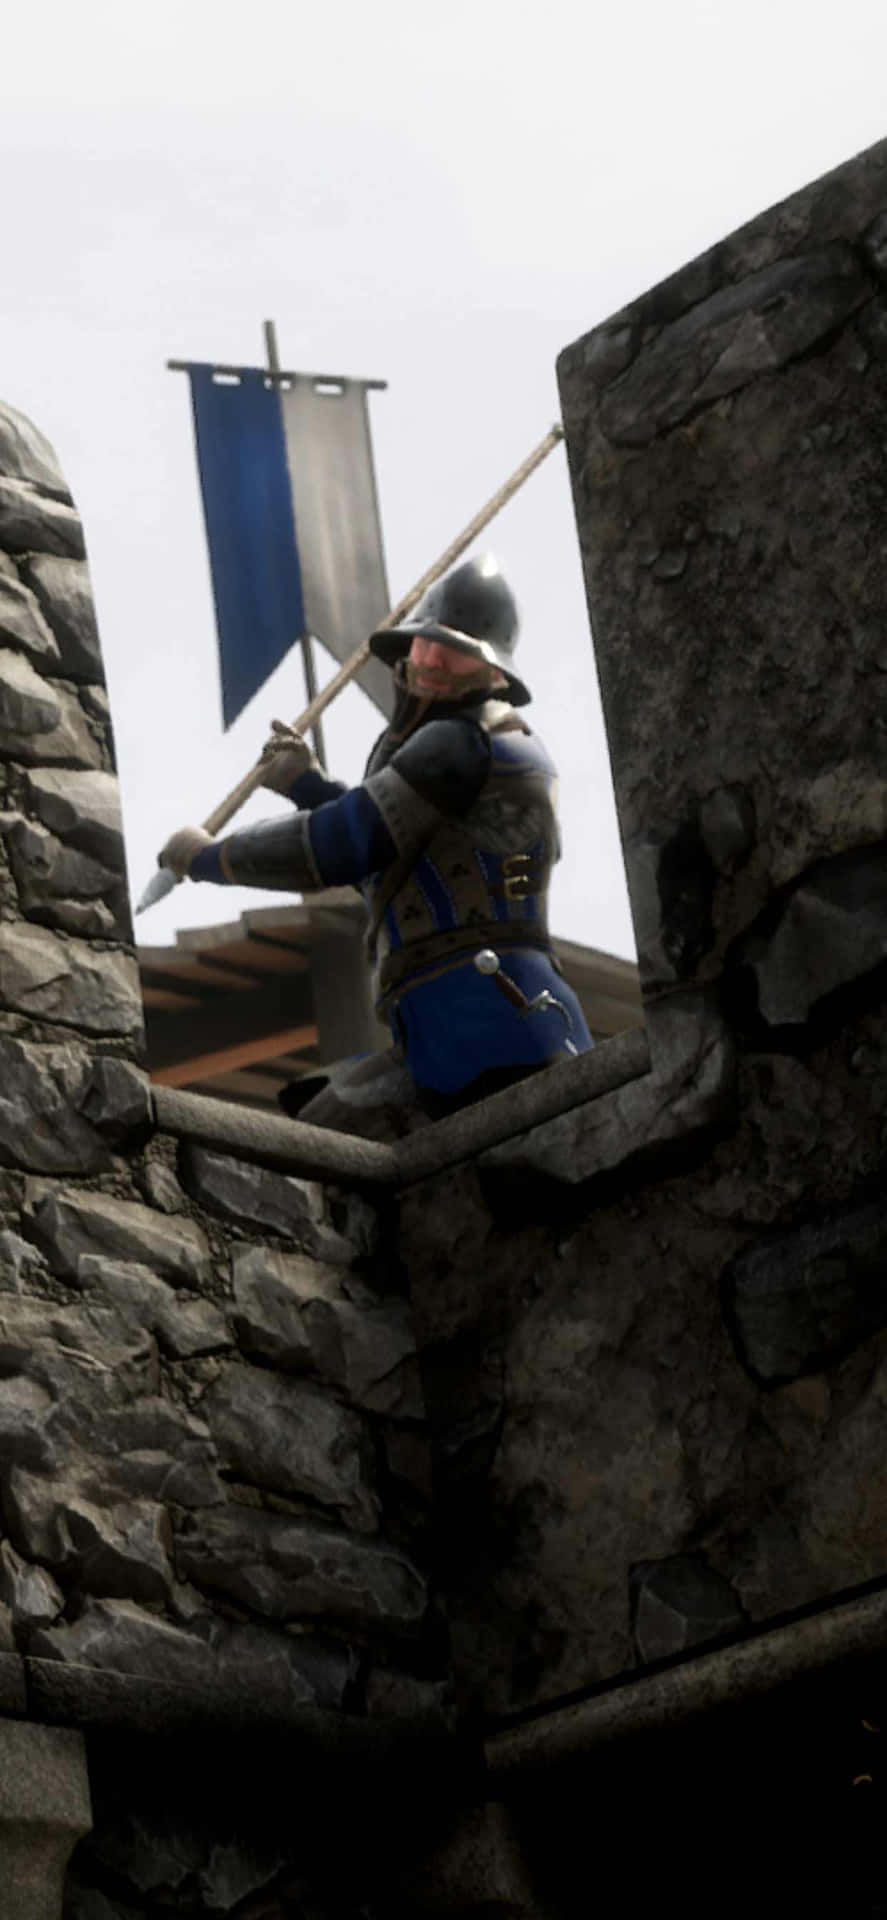 A Knight Is Standing On Top Of A Stone Wall